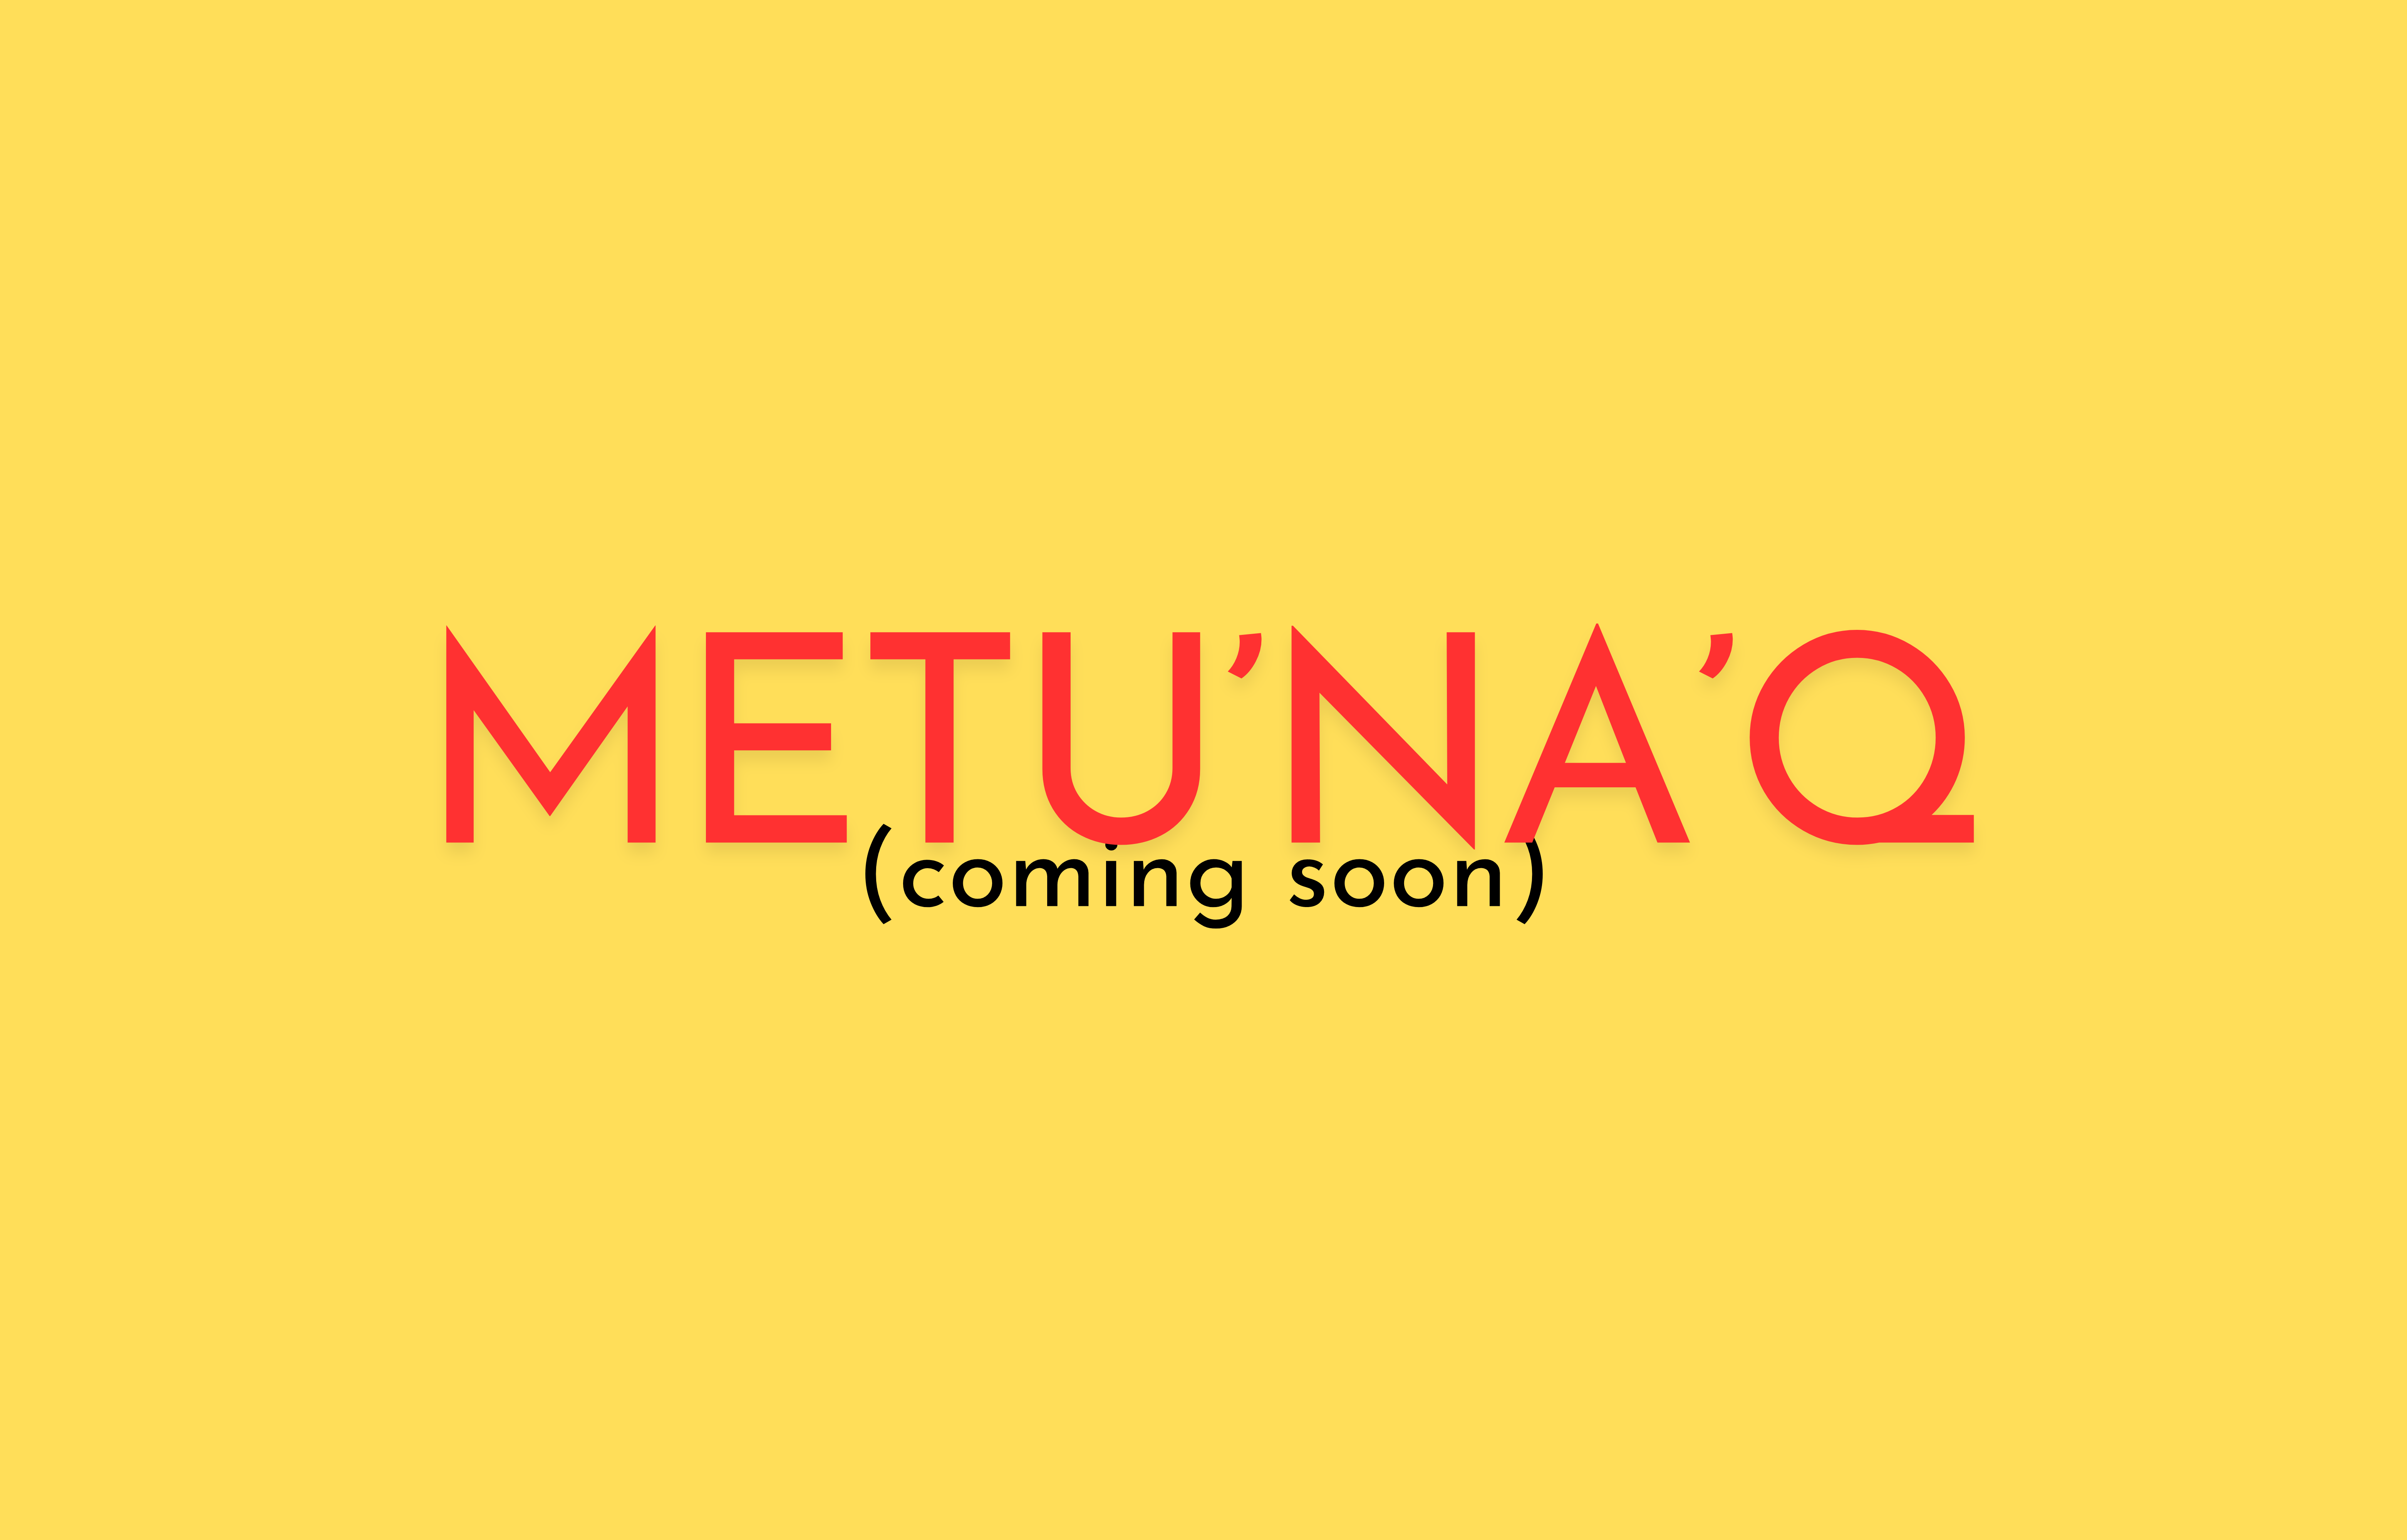 On a yellow background, large crisp text reads "Metu'na'q", in large red block letters, with the text "(coming soon)" just underneath it in smaller black letters